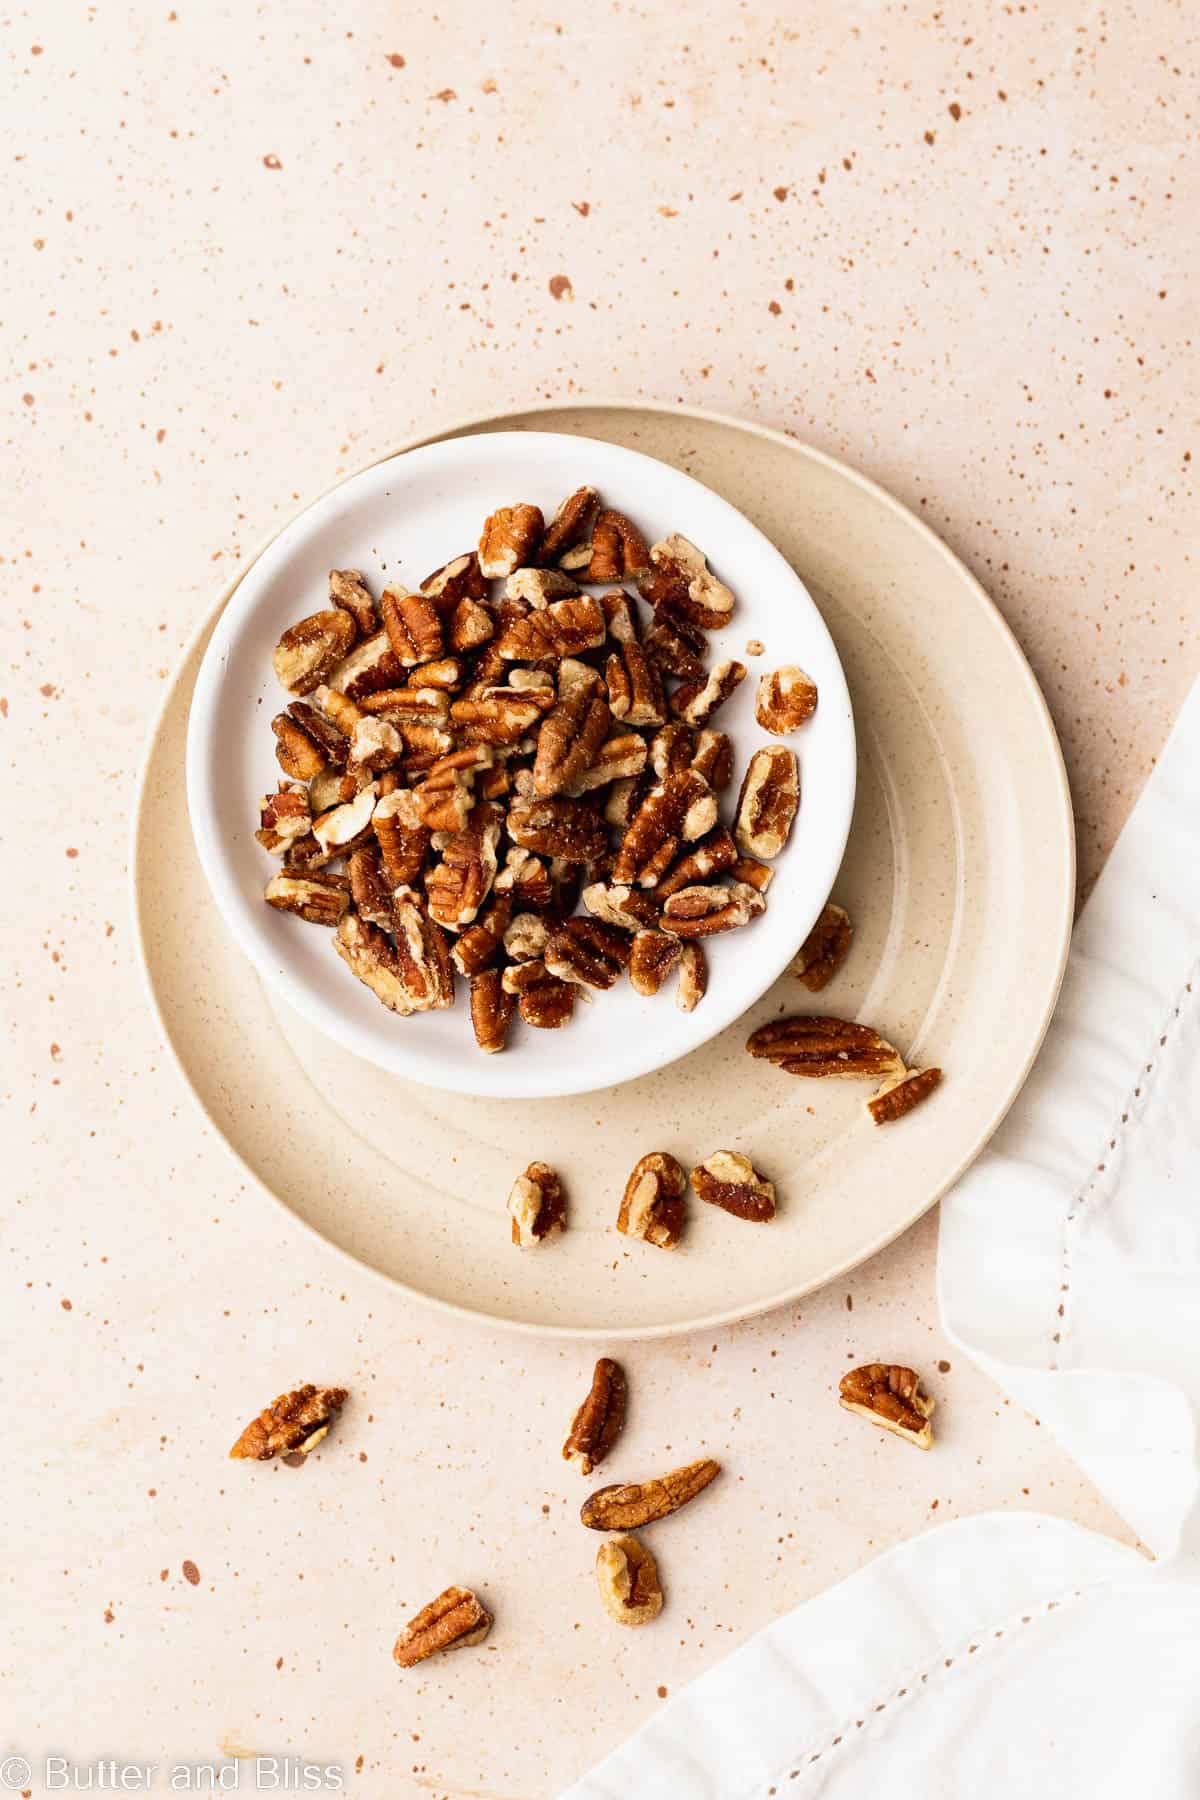 Chopped pecans in a small white dish set on a table.